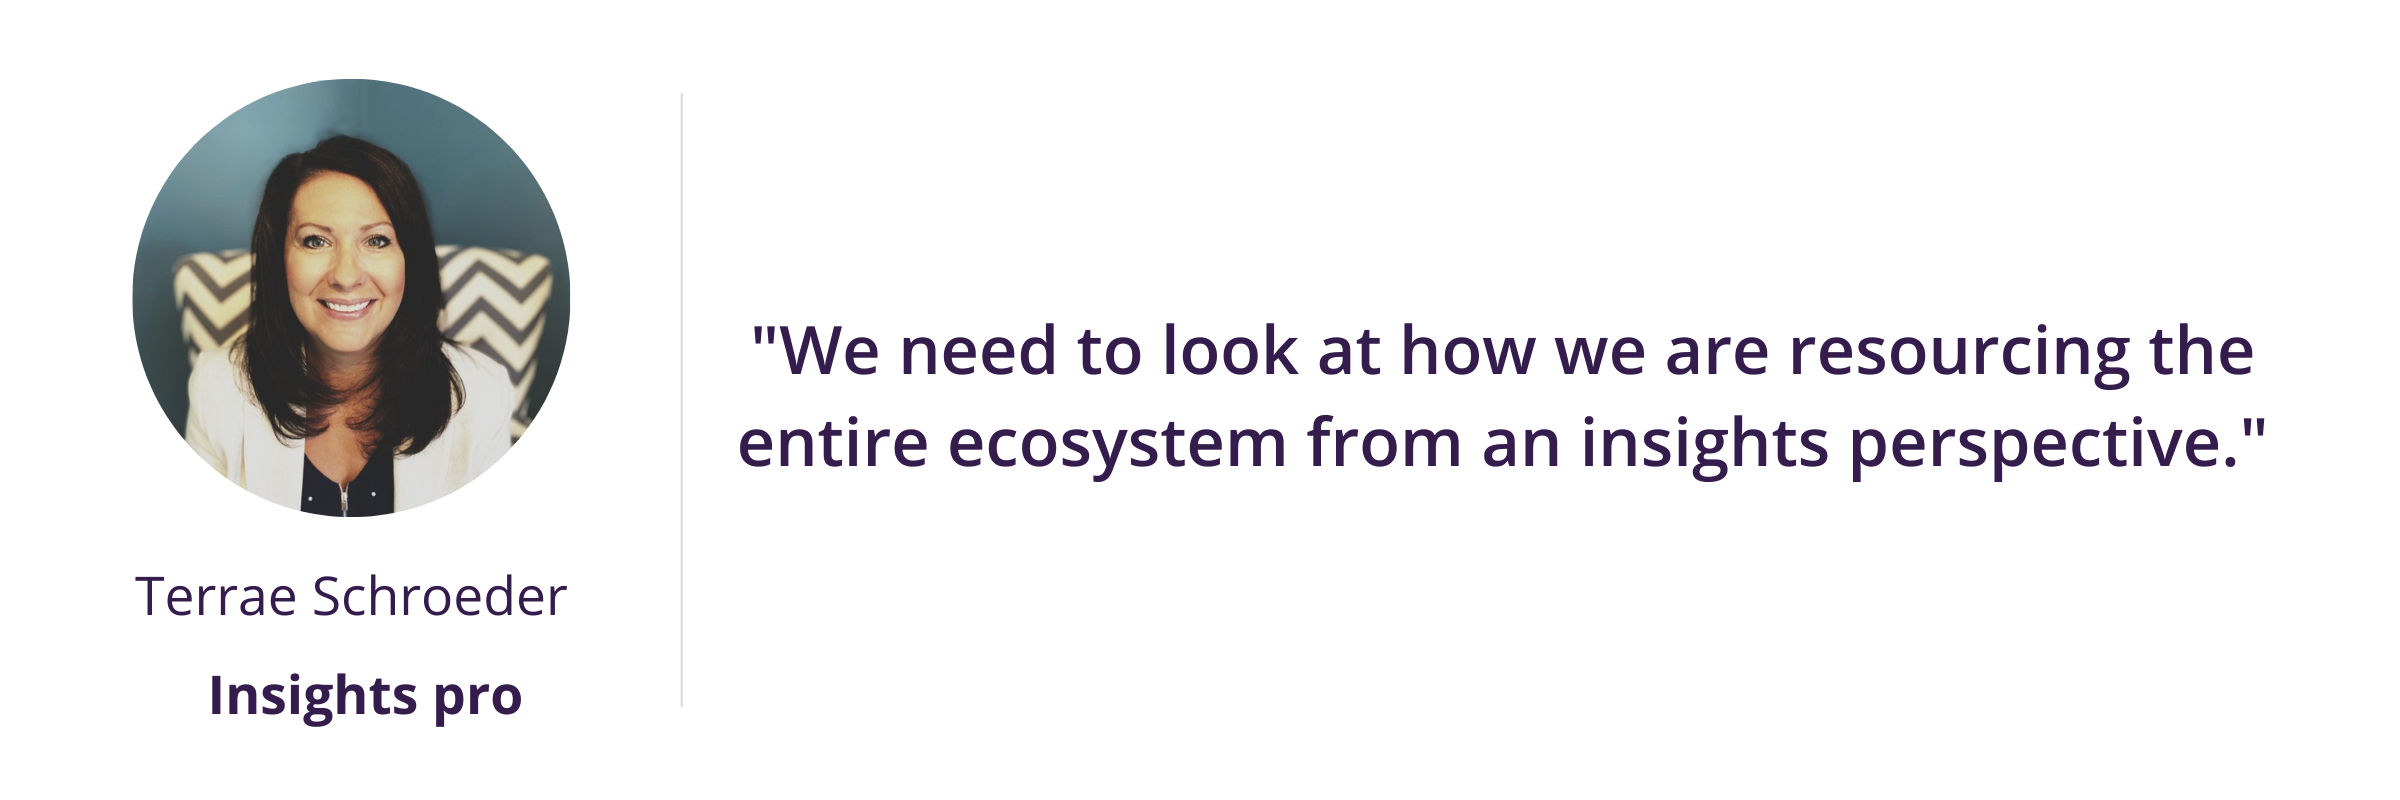 We need to look at how we are resourcing the entire ecosystem from an insights perspective.